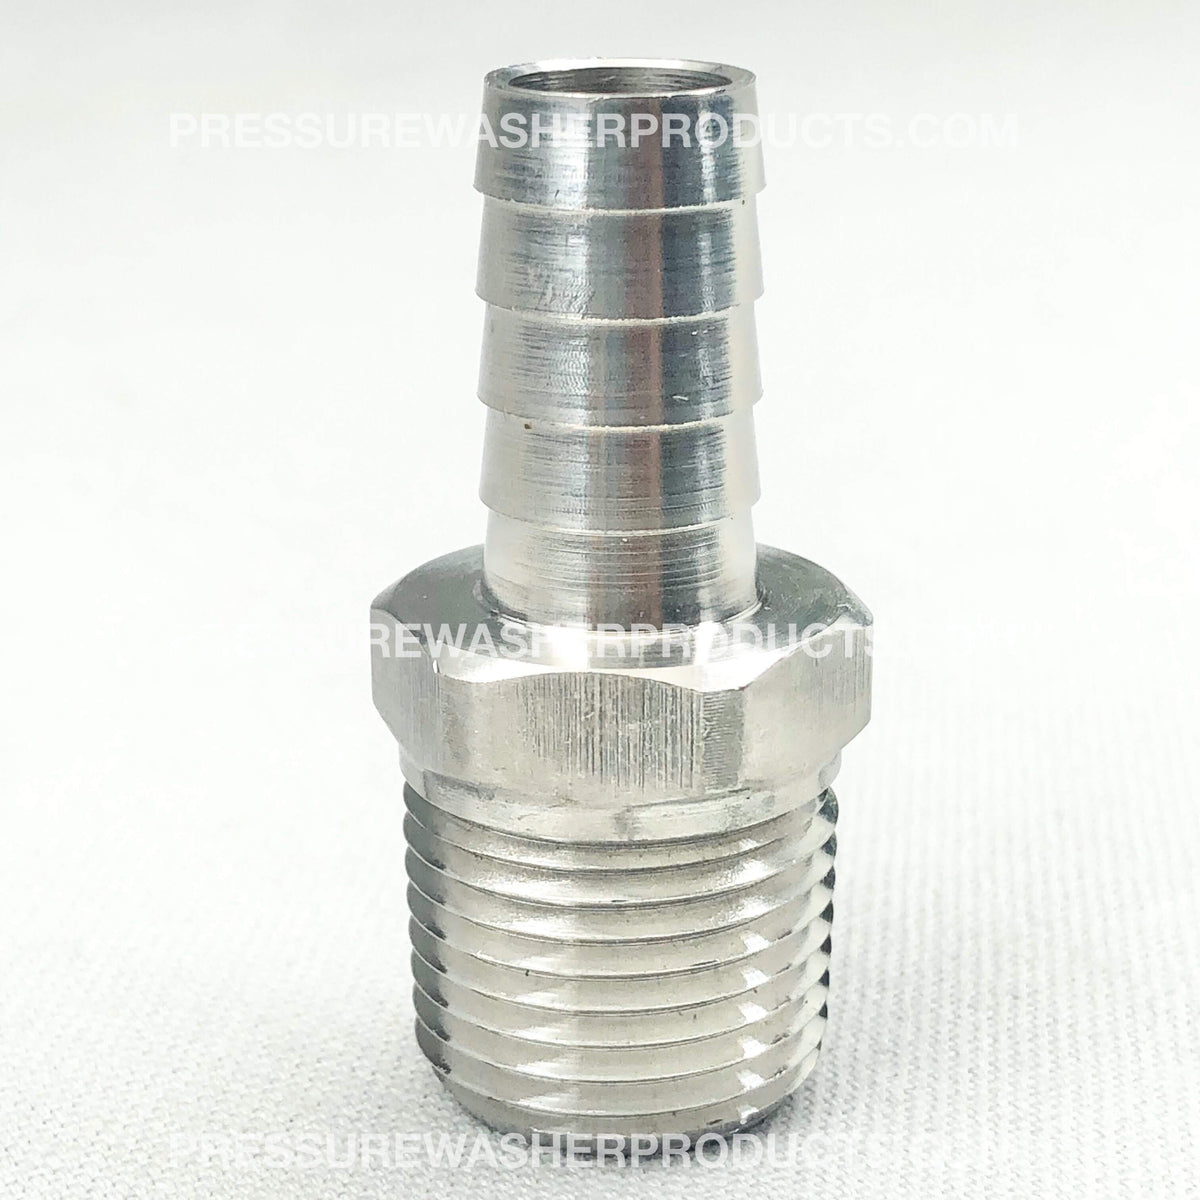 5/8 HOSE BARB X 1/2 MPT 316 STAINLESS STEEL